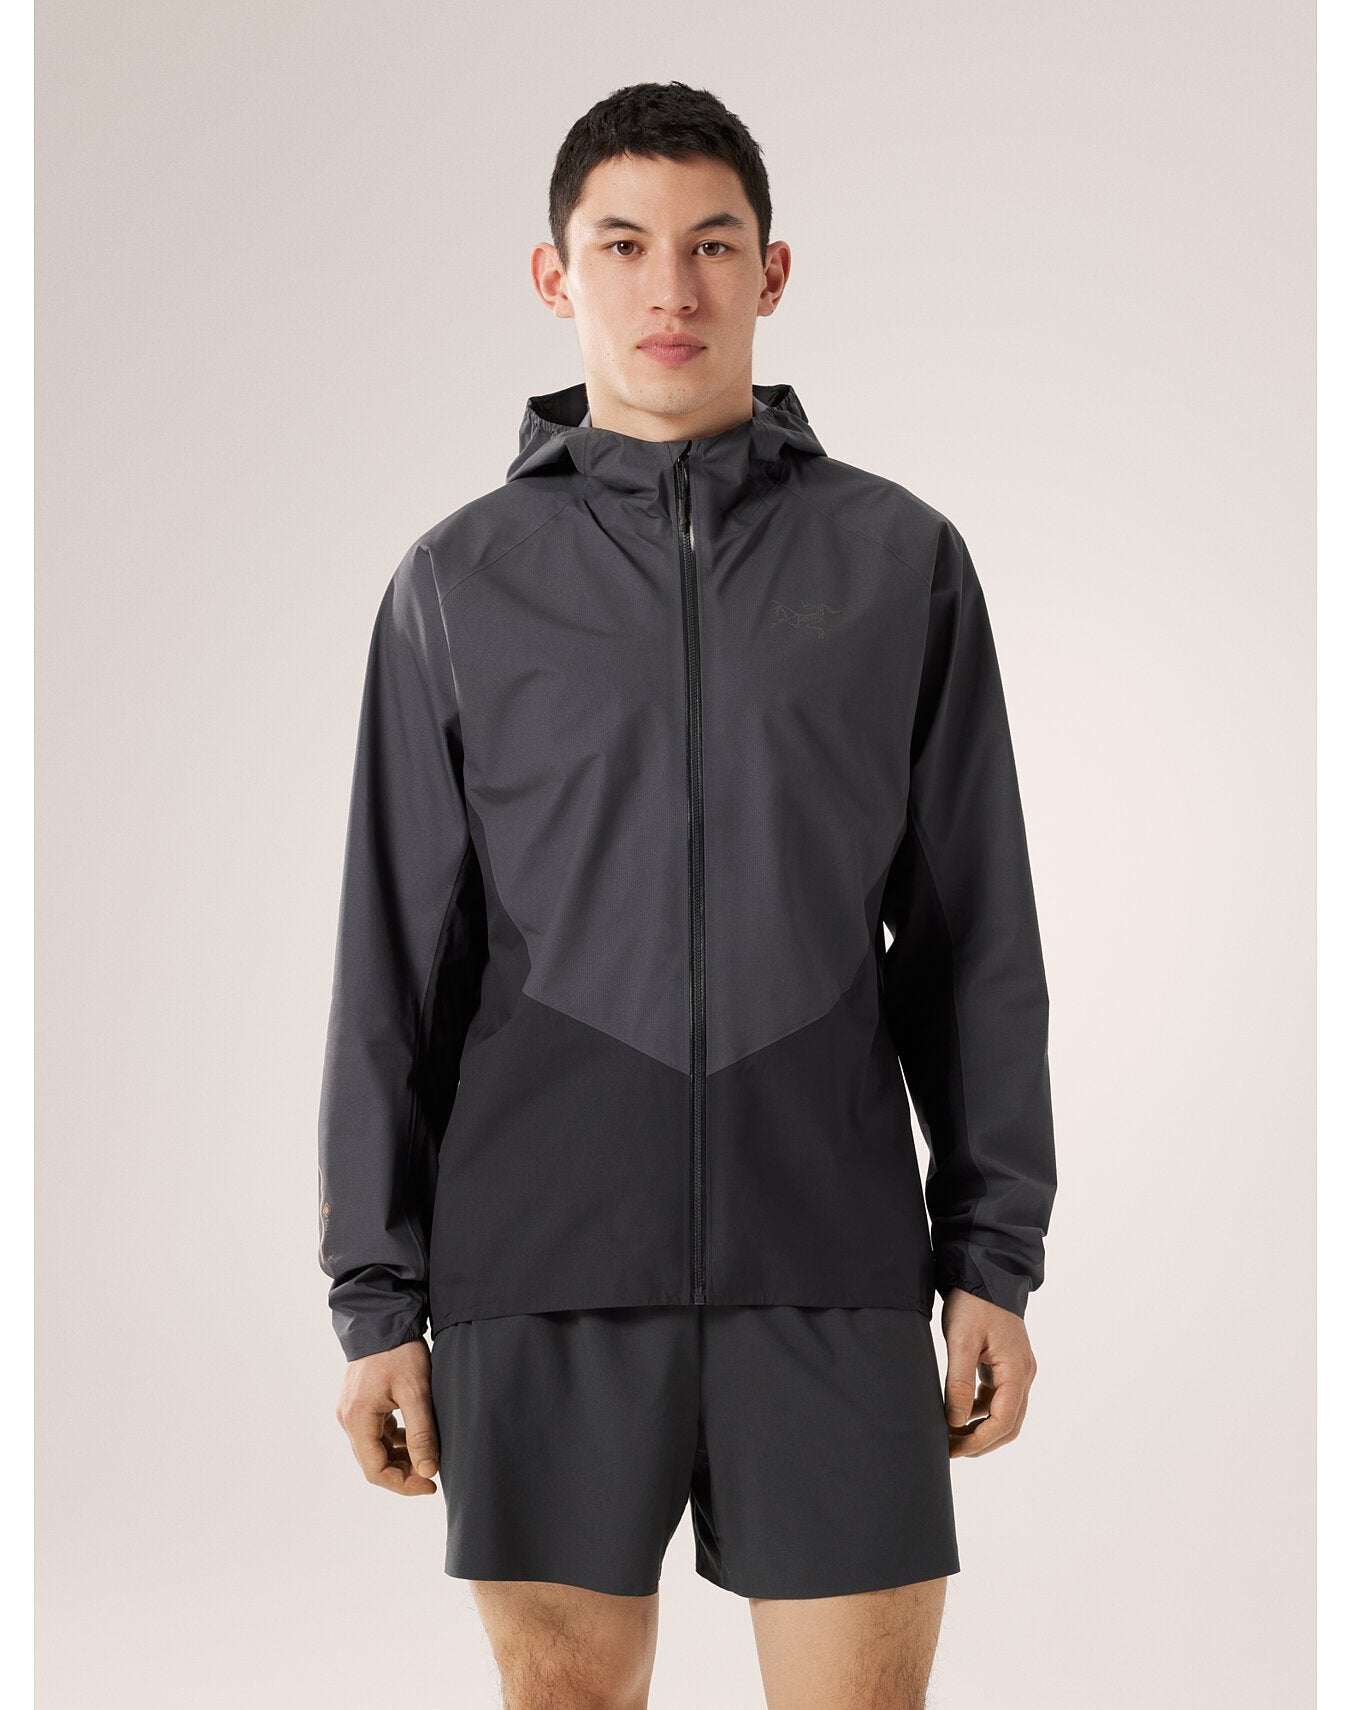 S24-X000006566-Norvan-Shell-Jacket-Graphite-Black-Front-View.jpg